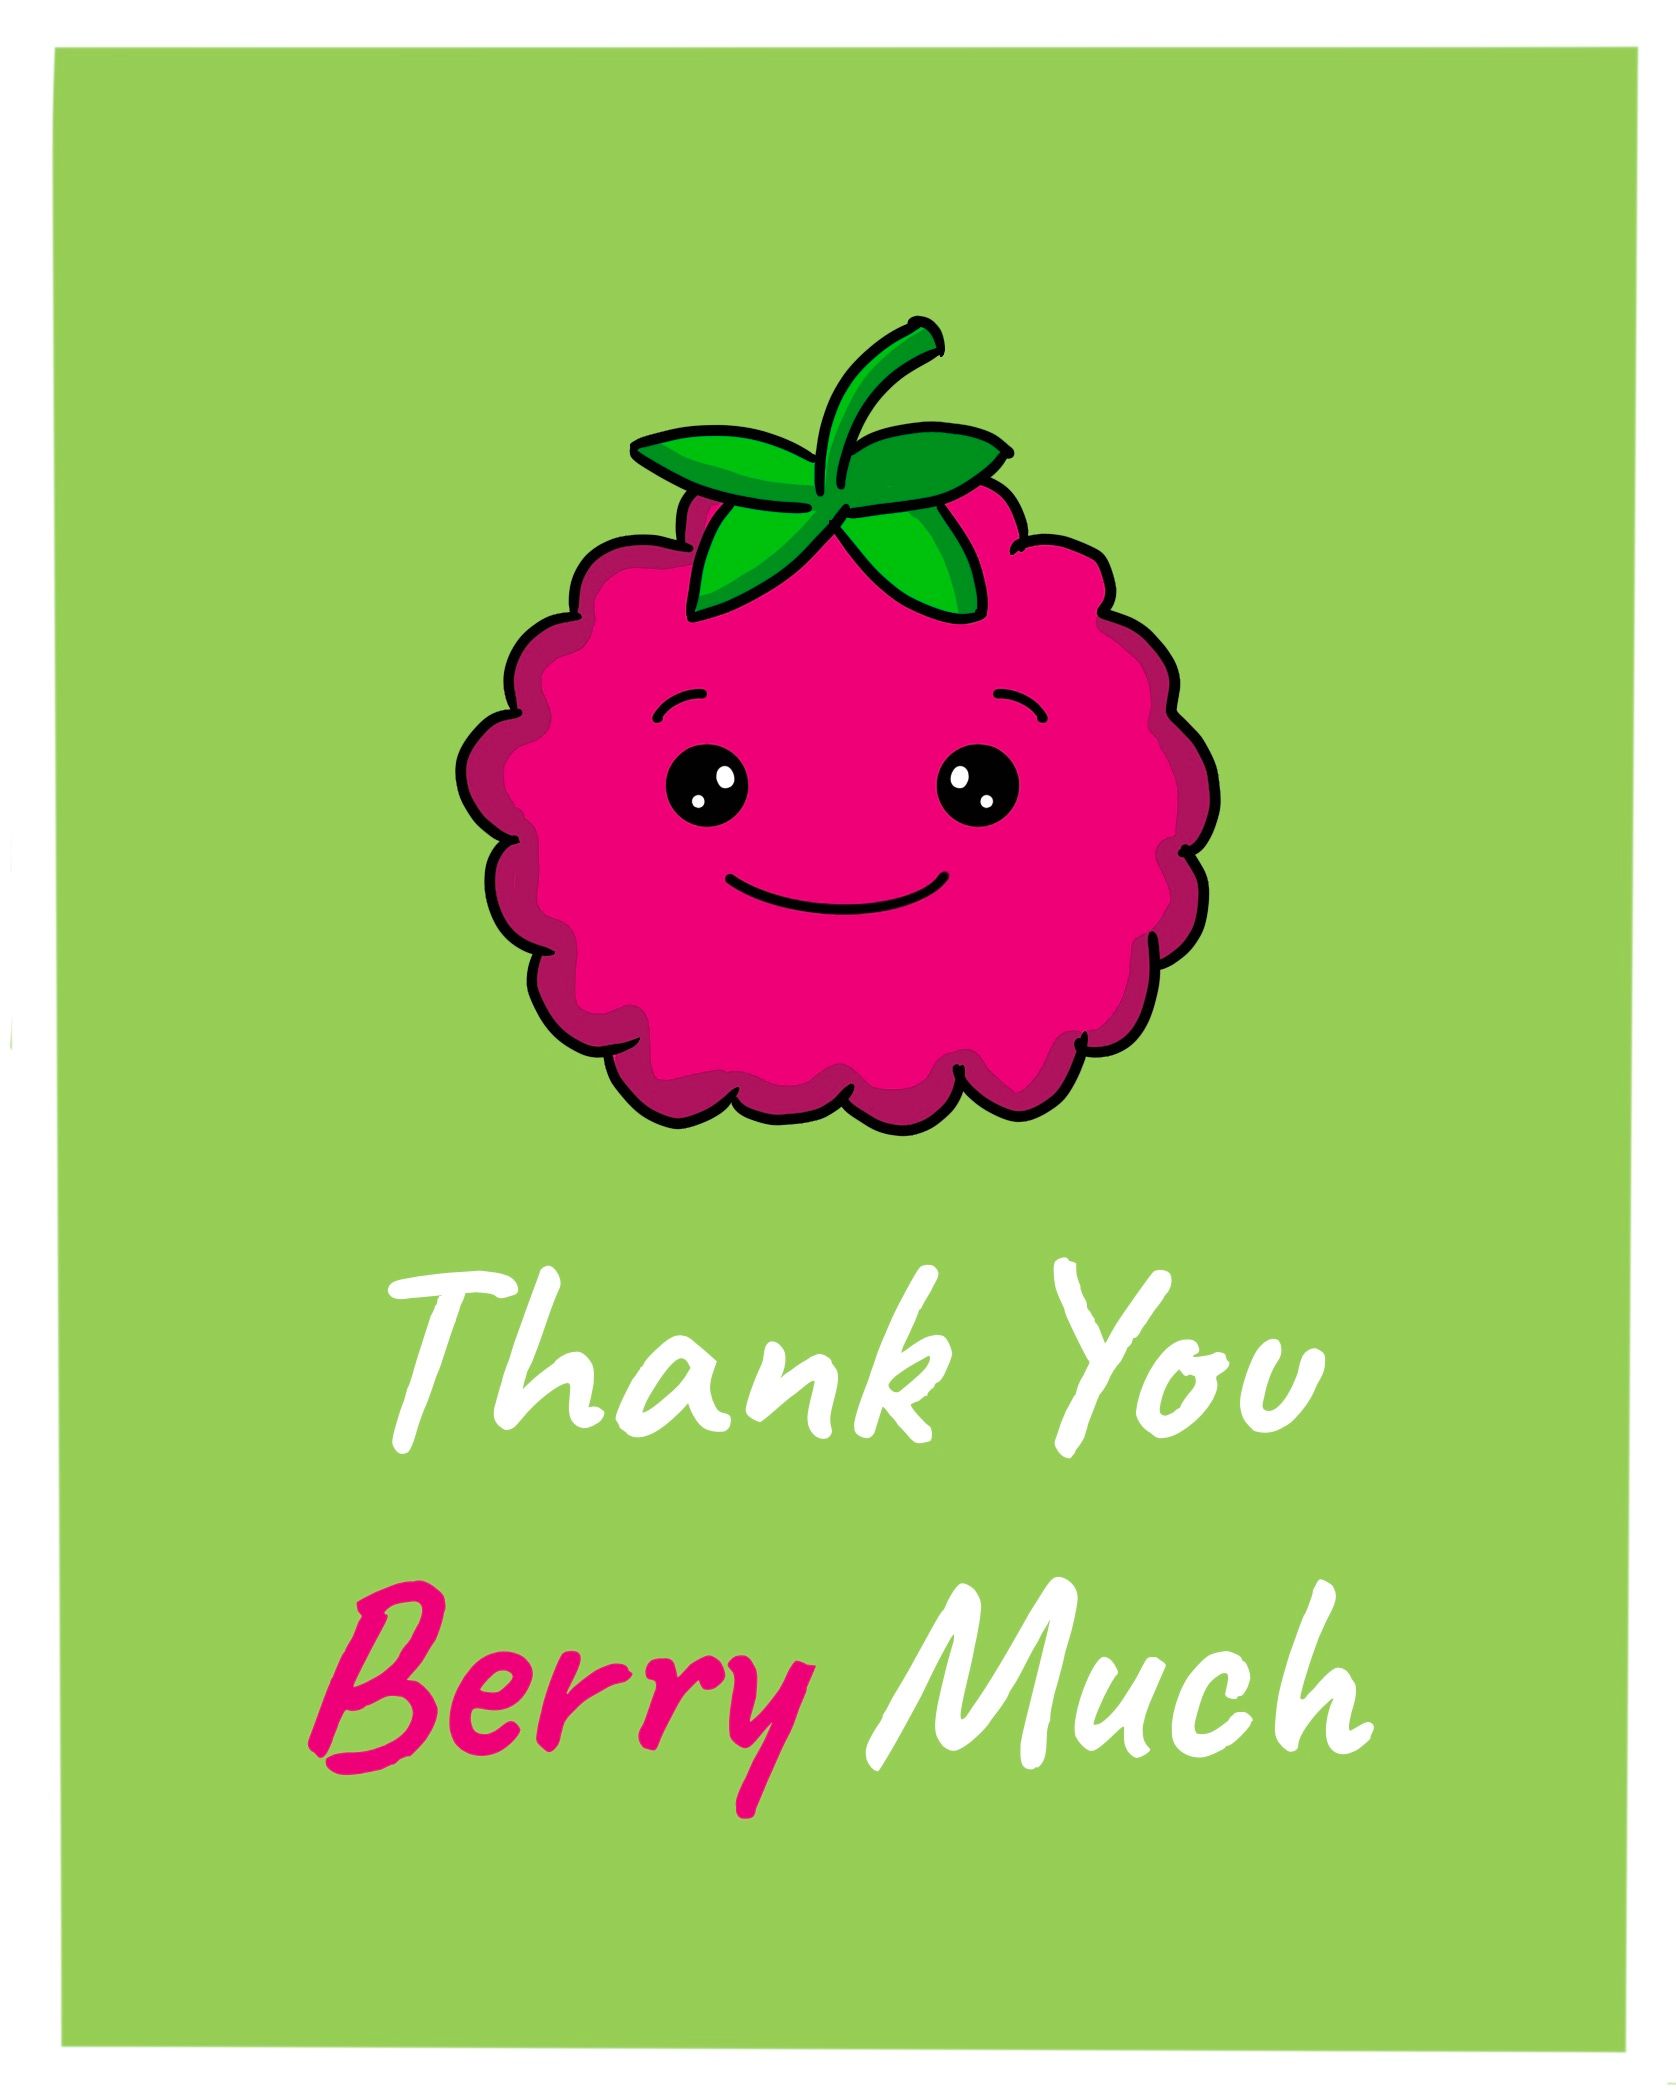 Card design "thank you berry much"